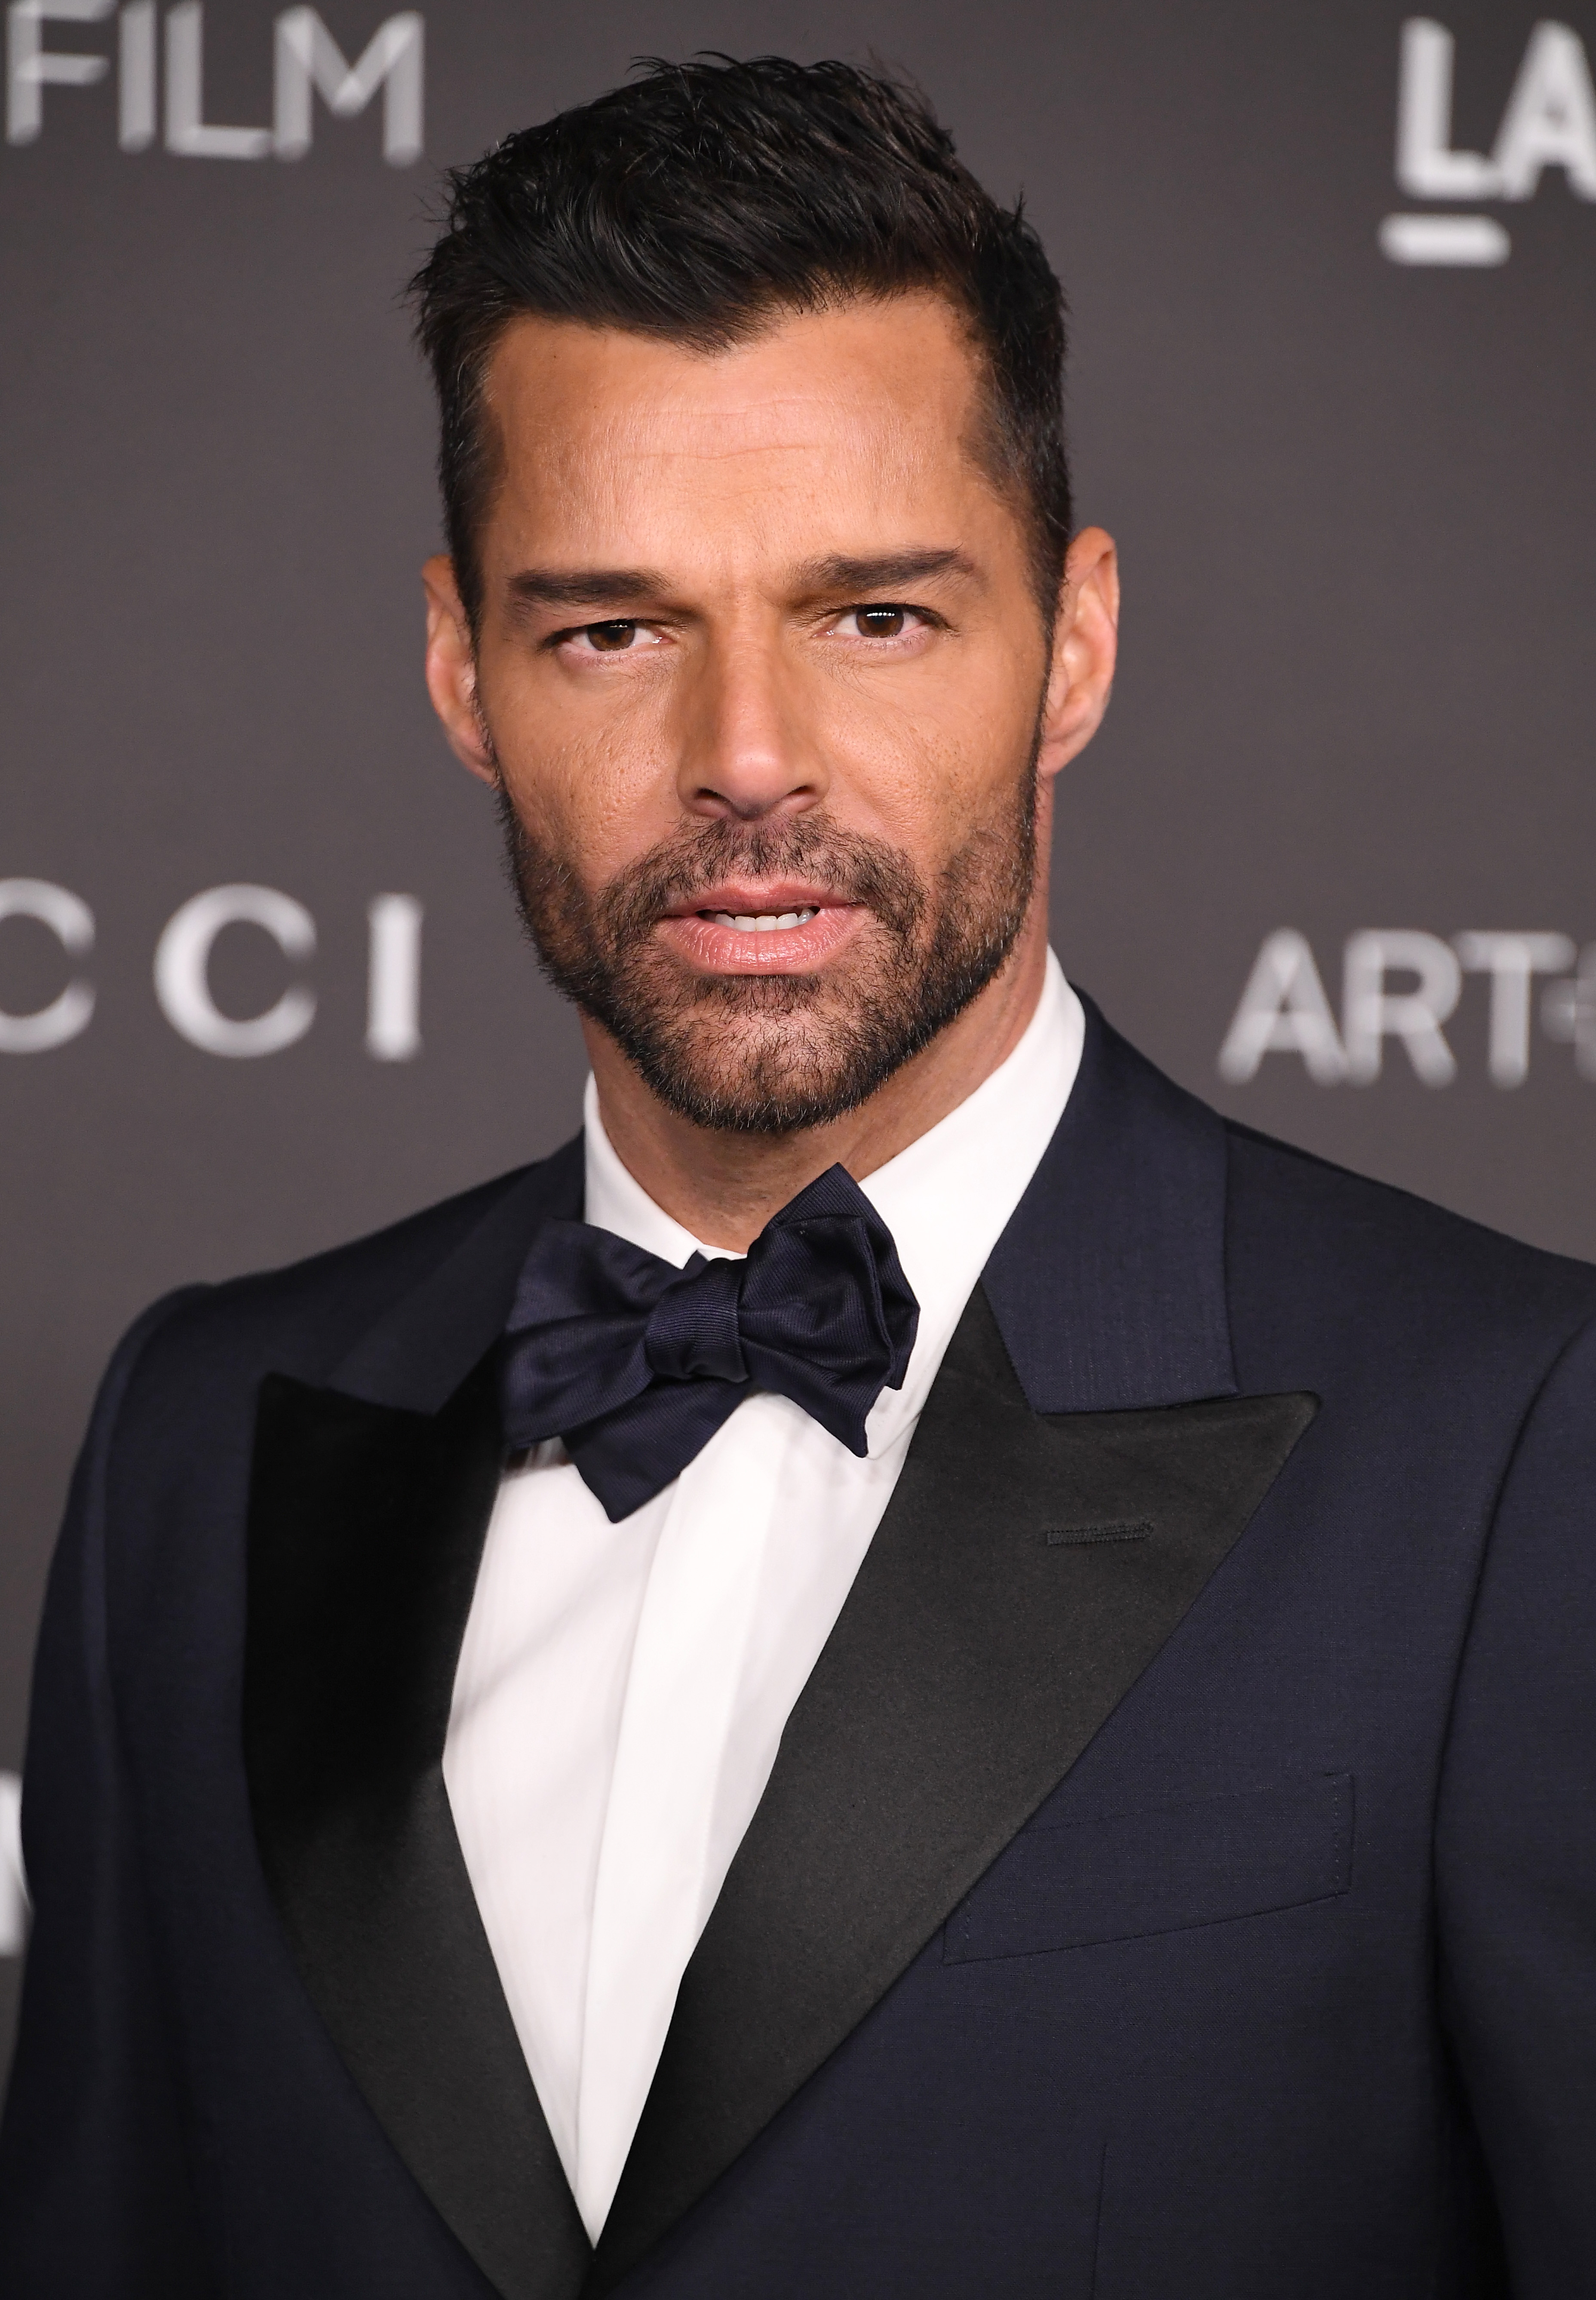 Ricky Martin at the LACMA Art + Film gala in Los Angeles, California on November 2, 2019 | Source: Getty Images